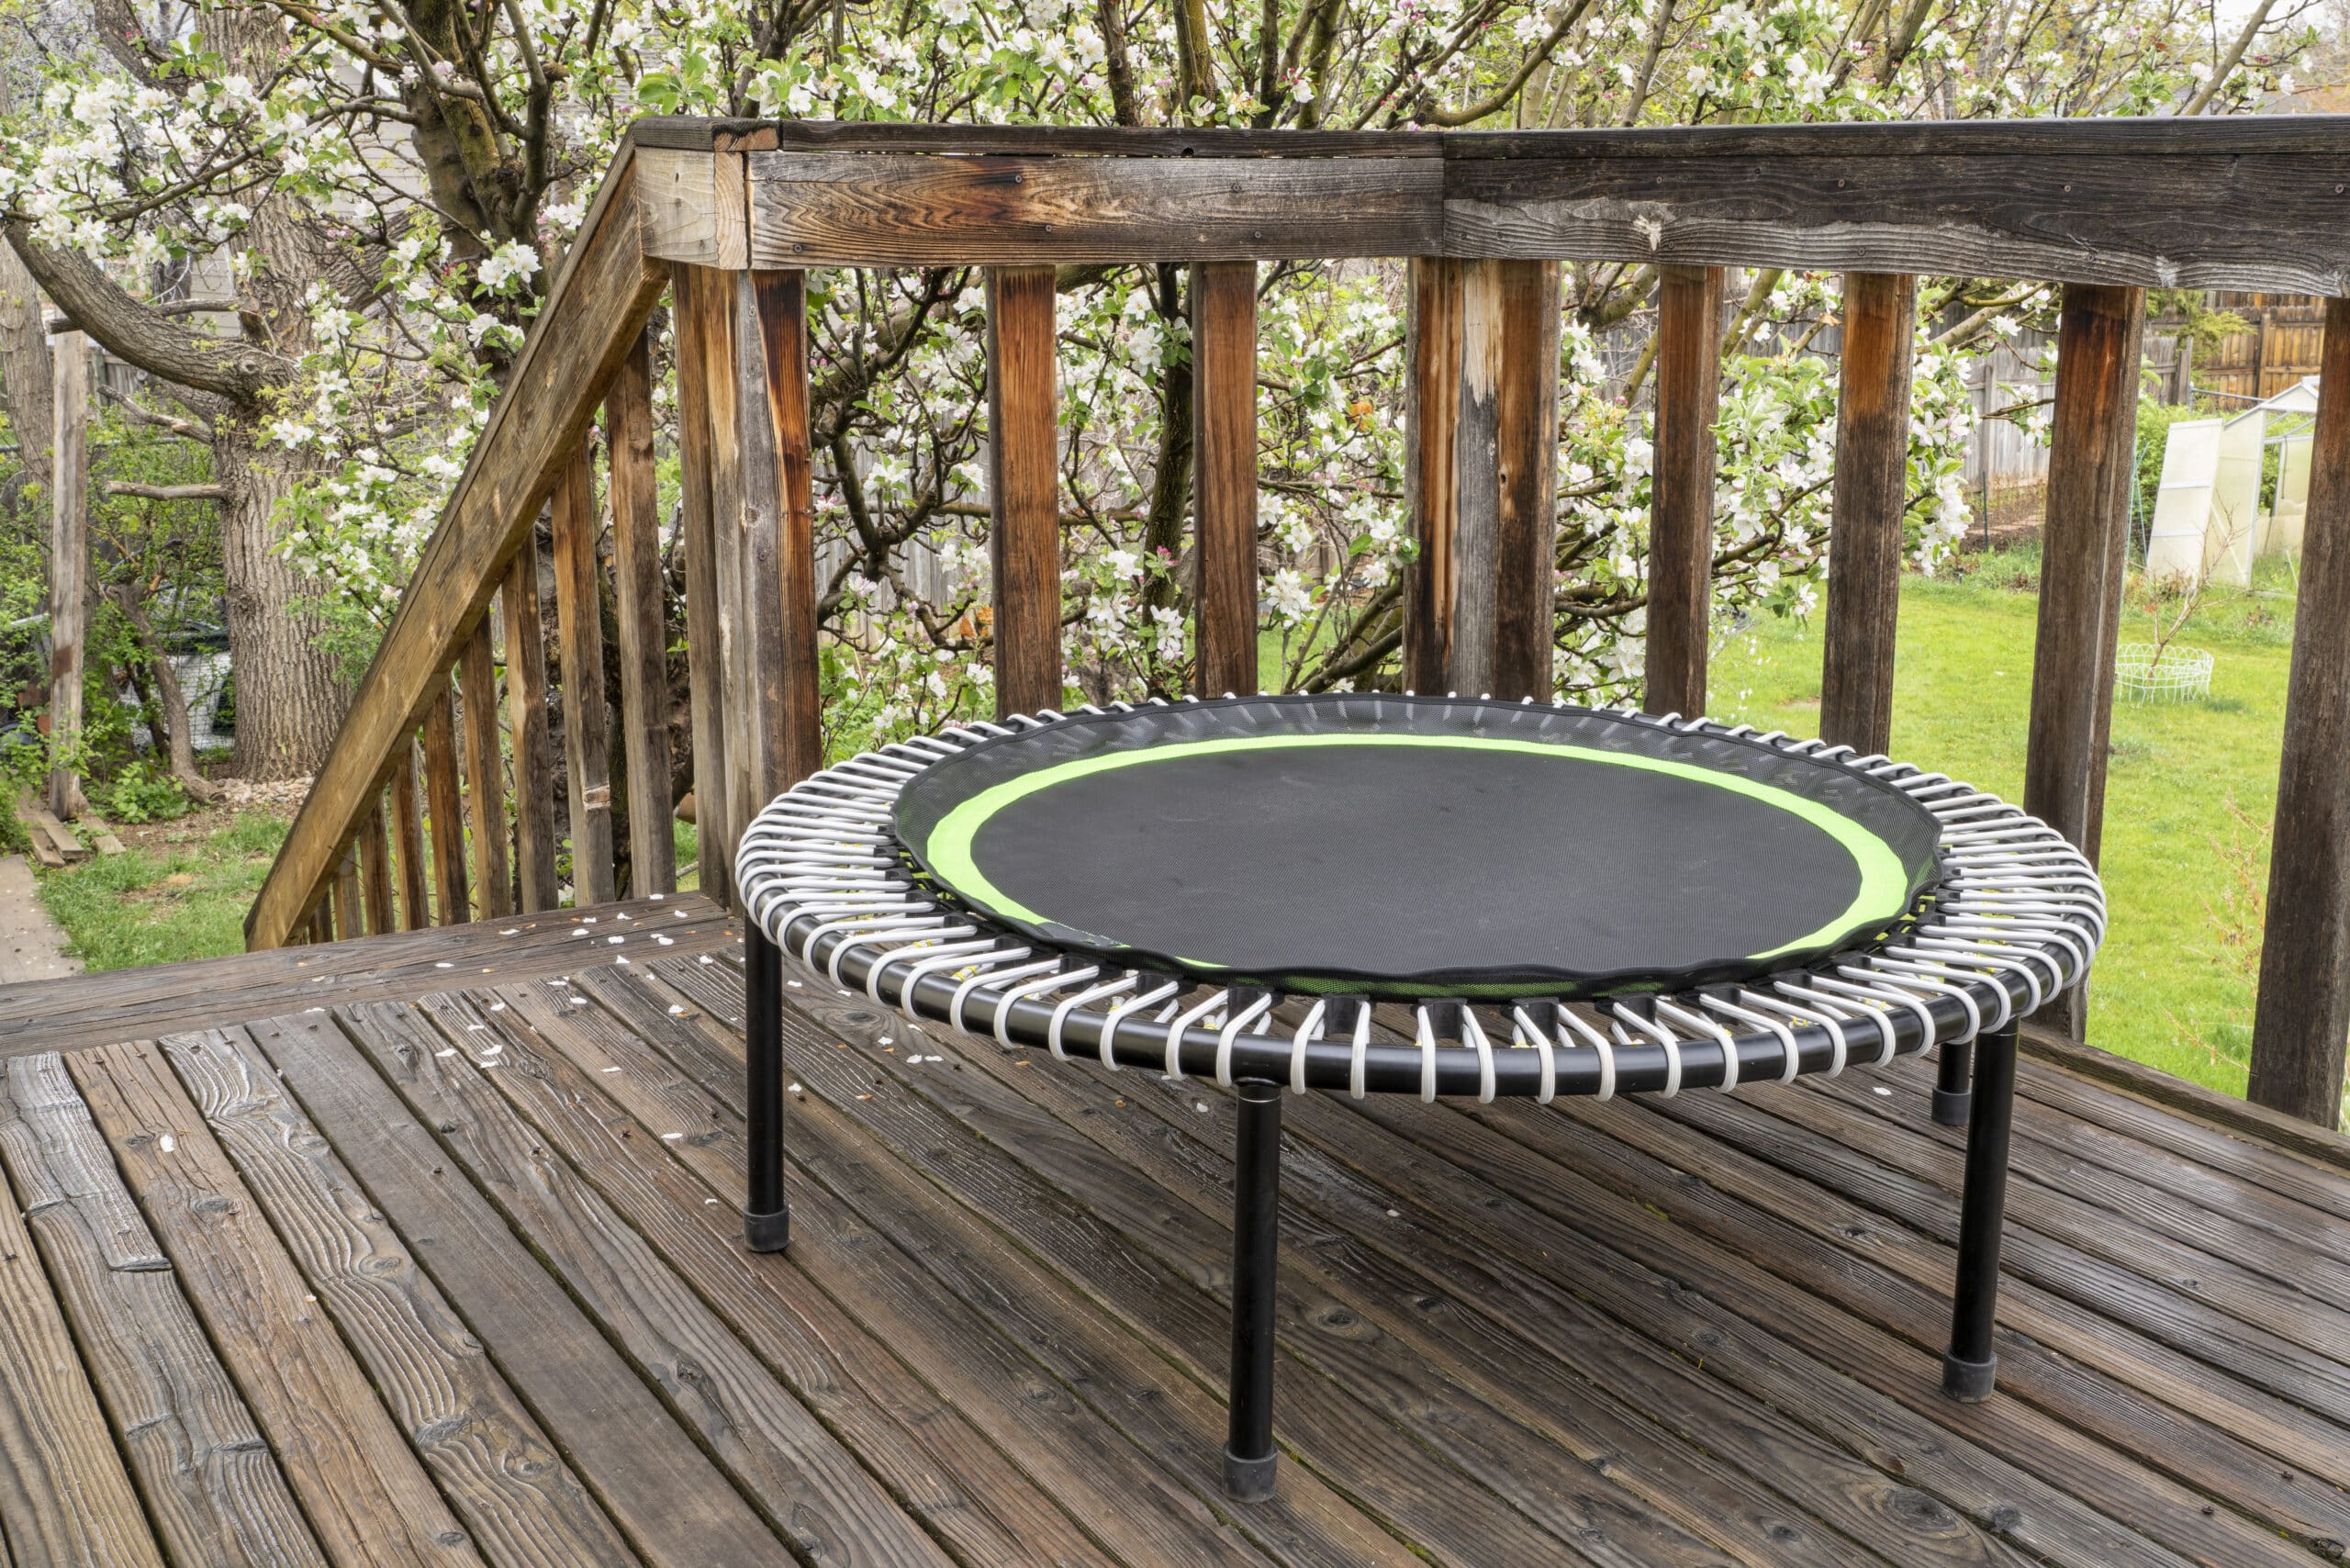 www.appr.com : How much space do you need around a trampoline?